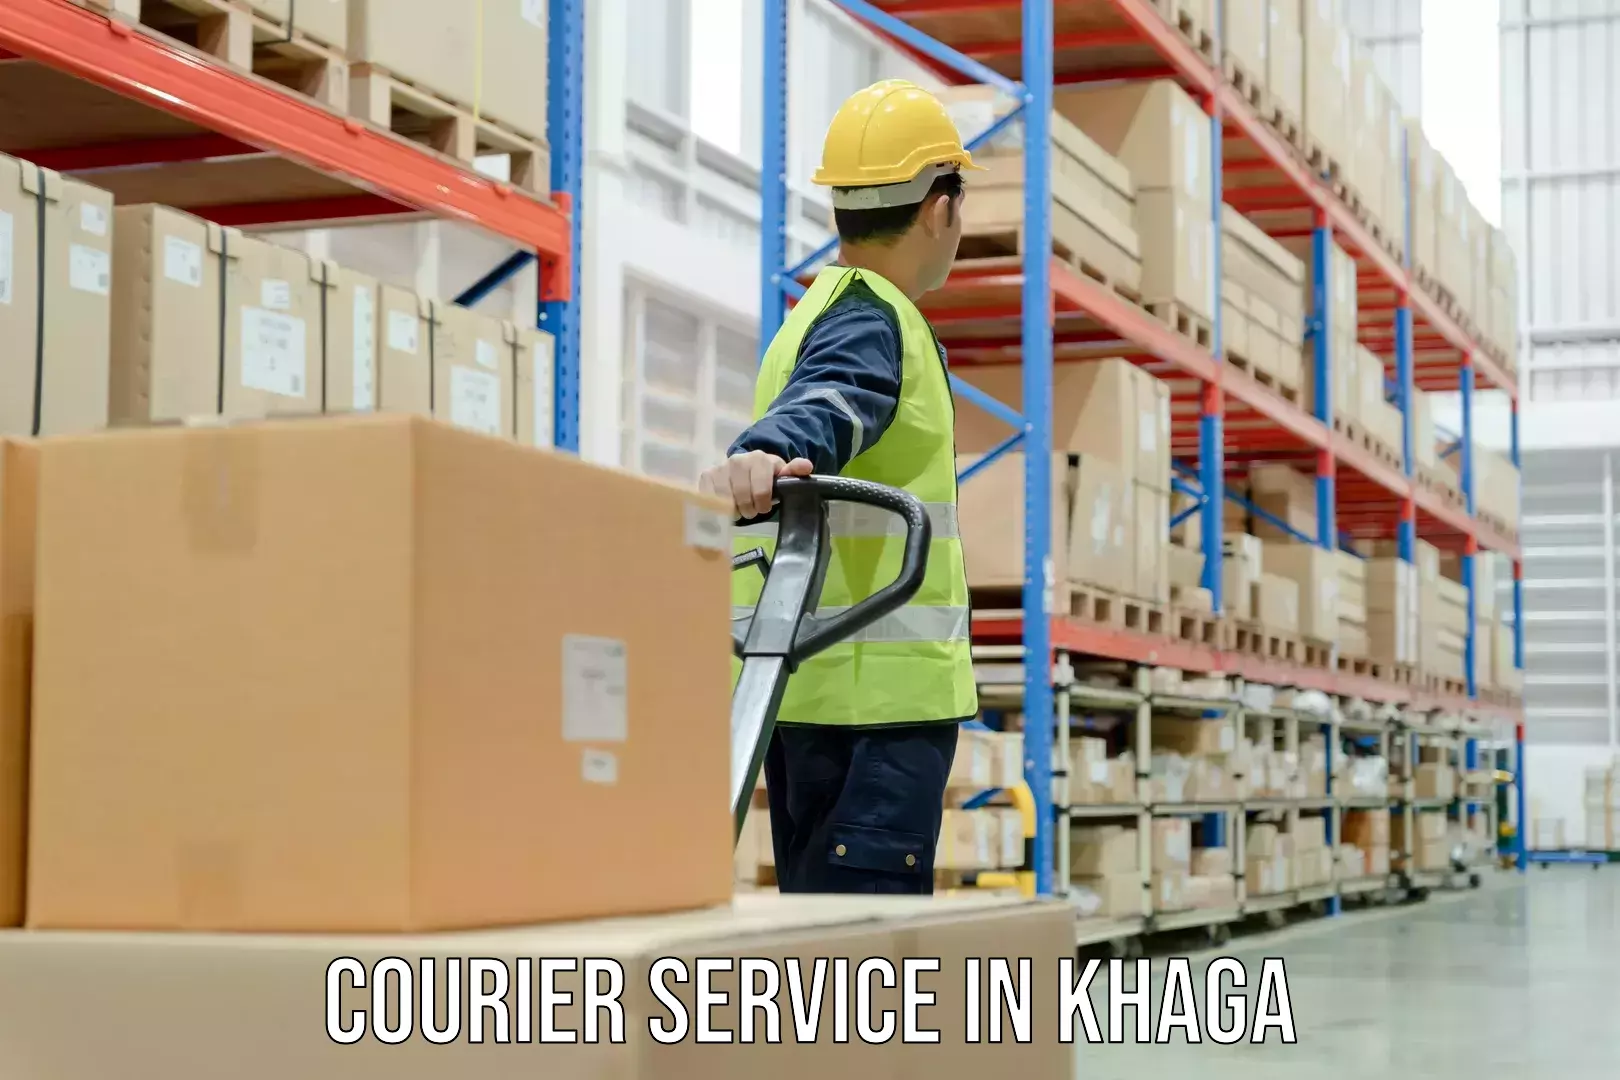 Parcel delivery in Khaga